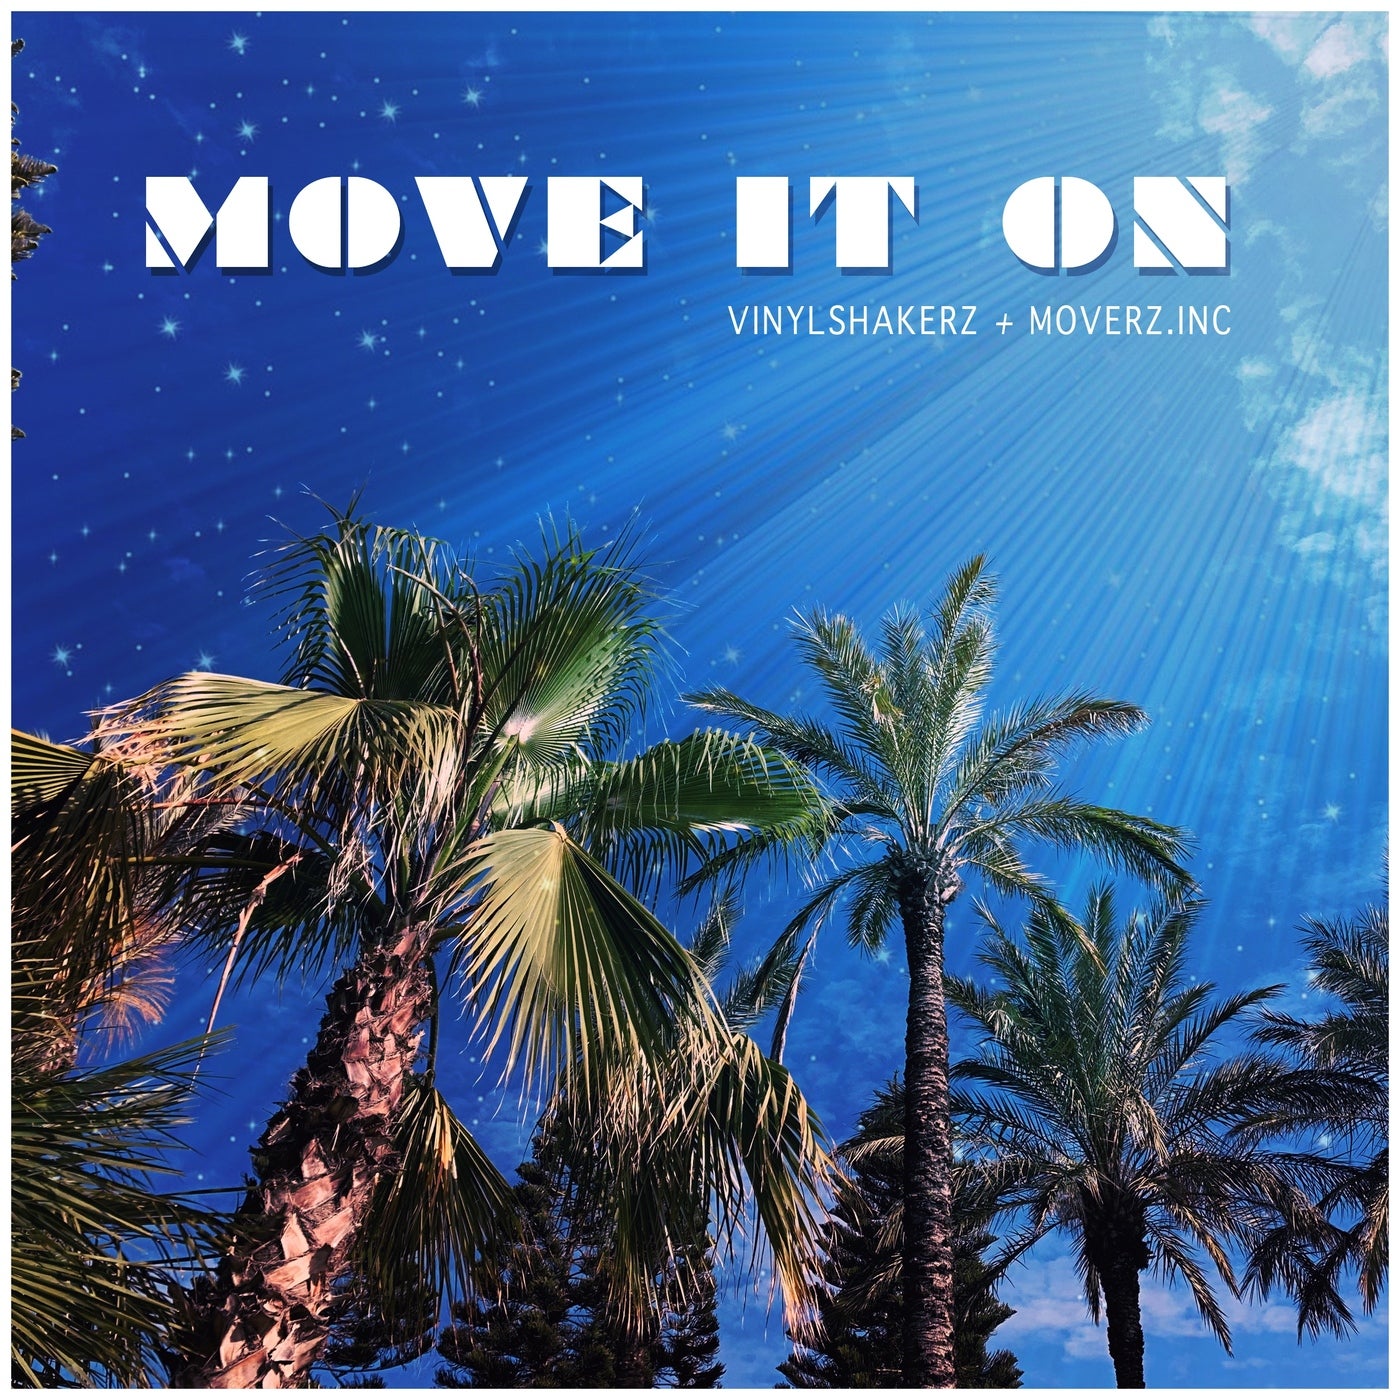 Move it on